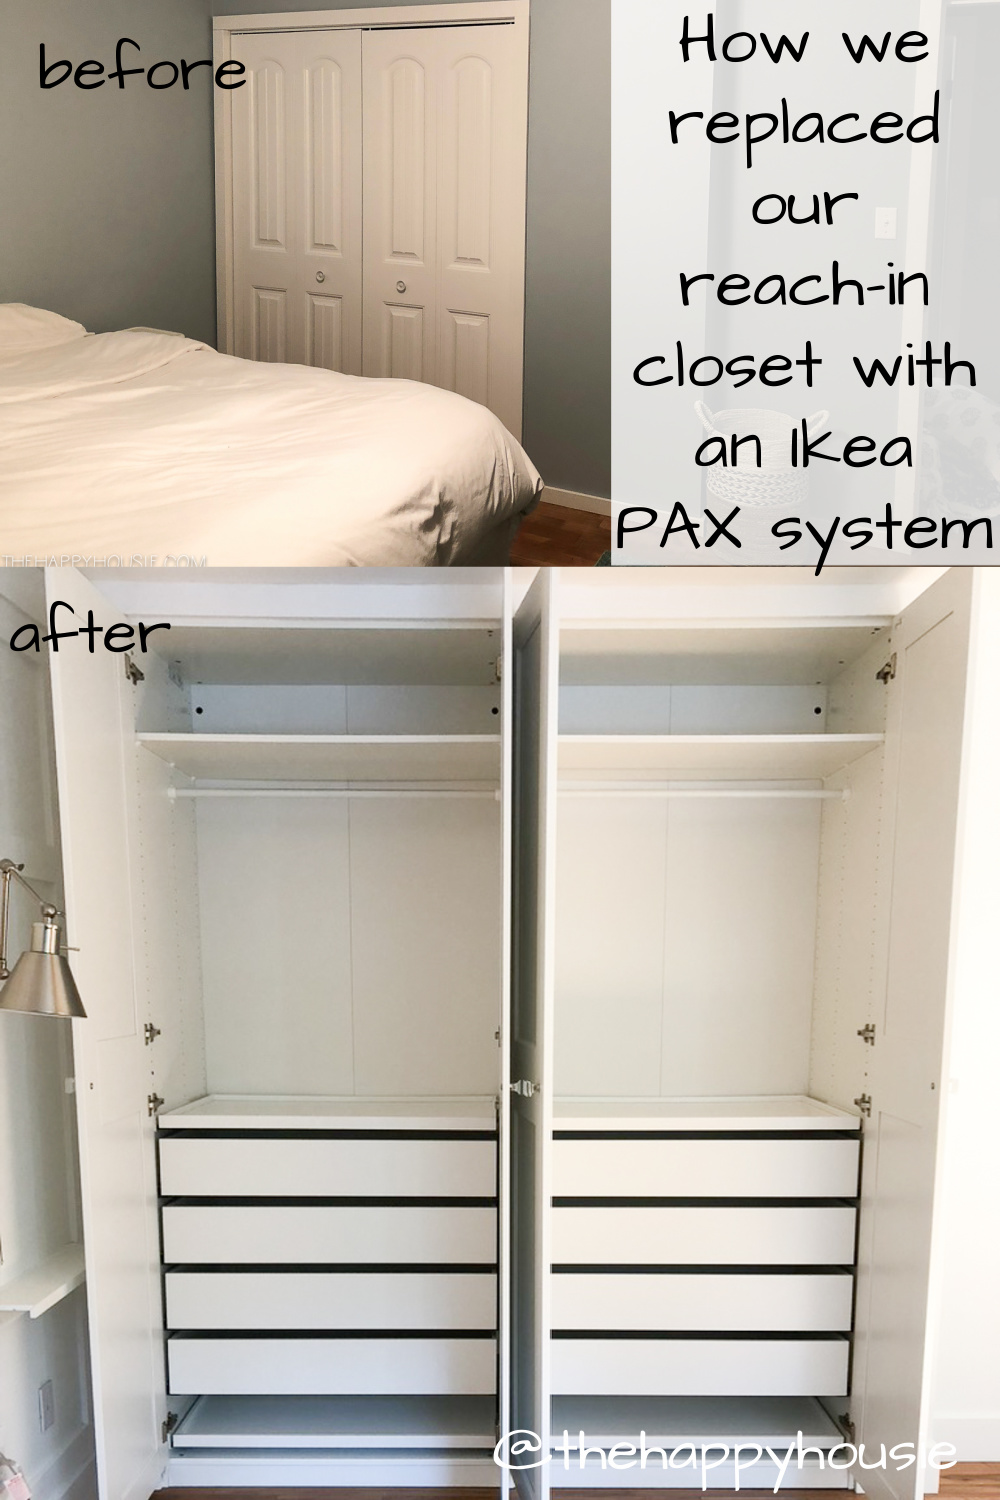 a basic reach-in closet being changed over to an Ikea Pax closet system